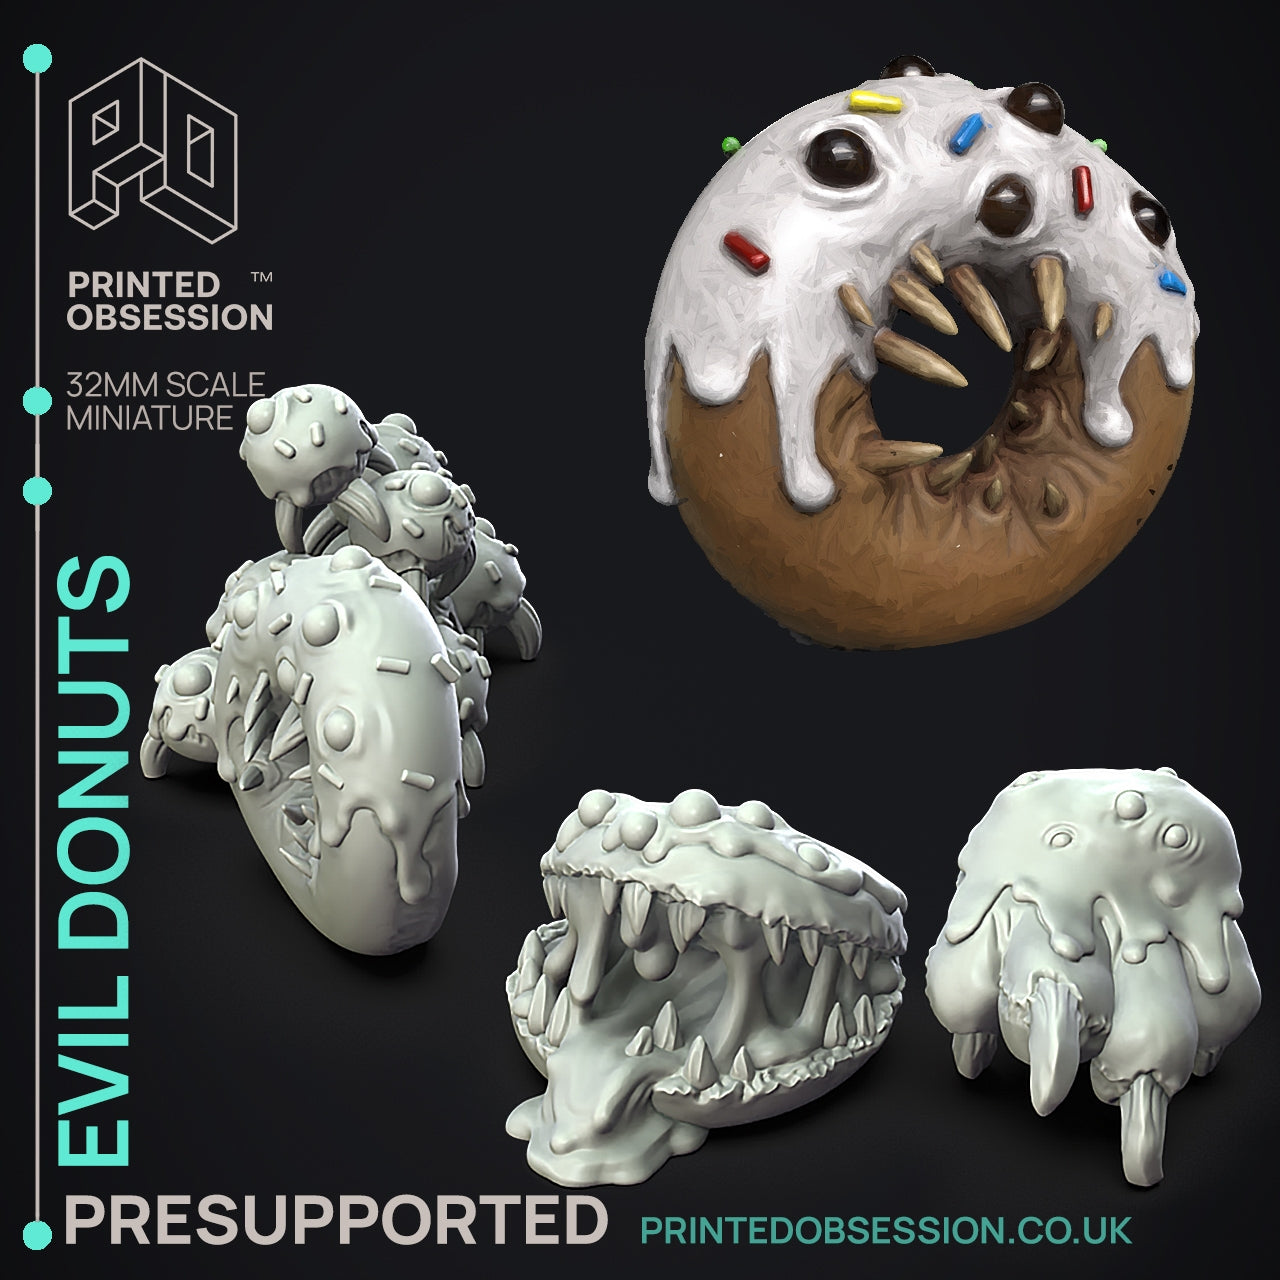 Evil Donuts - The Possessed Bakery - The Printed Obsession - Table-top mini, 3D Printed Collectable for painting and playing!